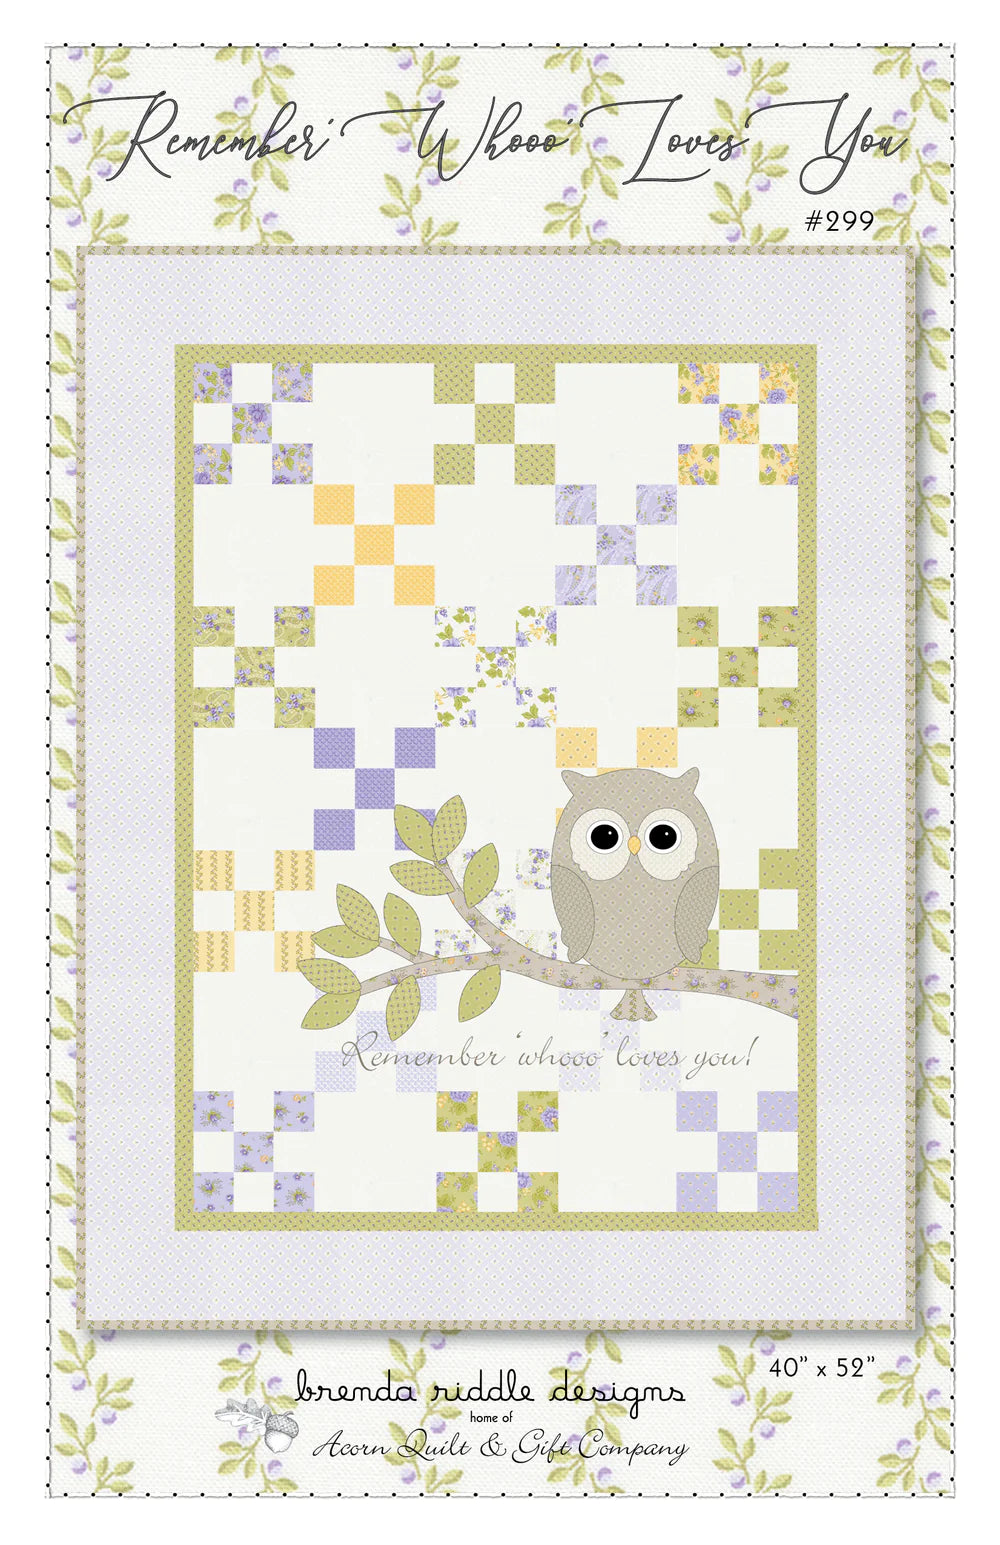 Remember Whooo Loves You Quilt Pattern by Brenda Riddle Designs